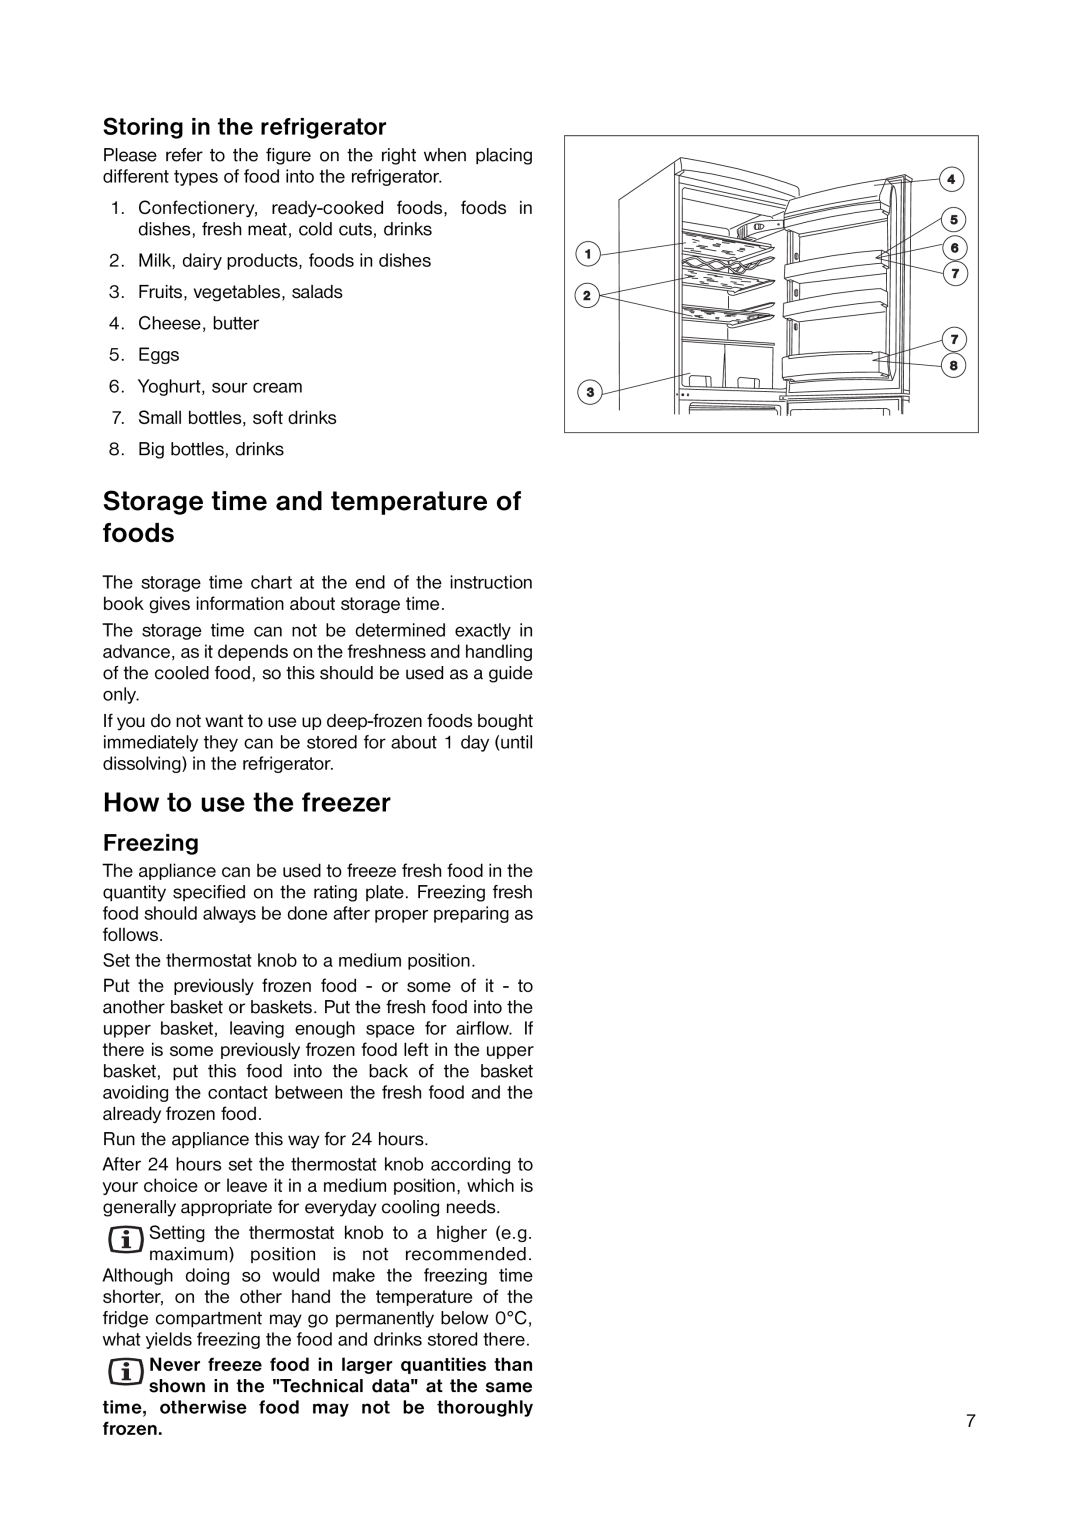 Zanussi ZRB 8441 W Storage time and temperature of foods, How to use the freezer, Storing in the refrigerator, Freezing 